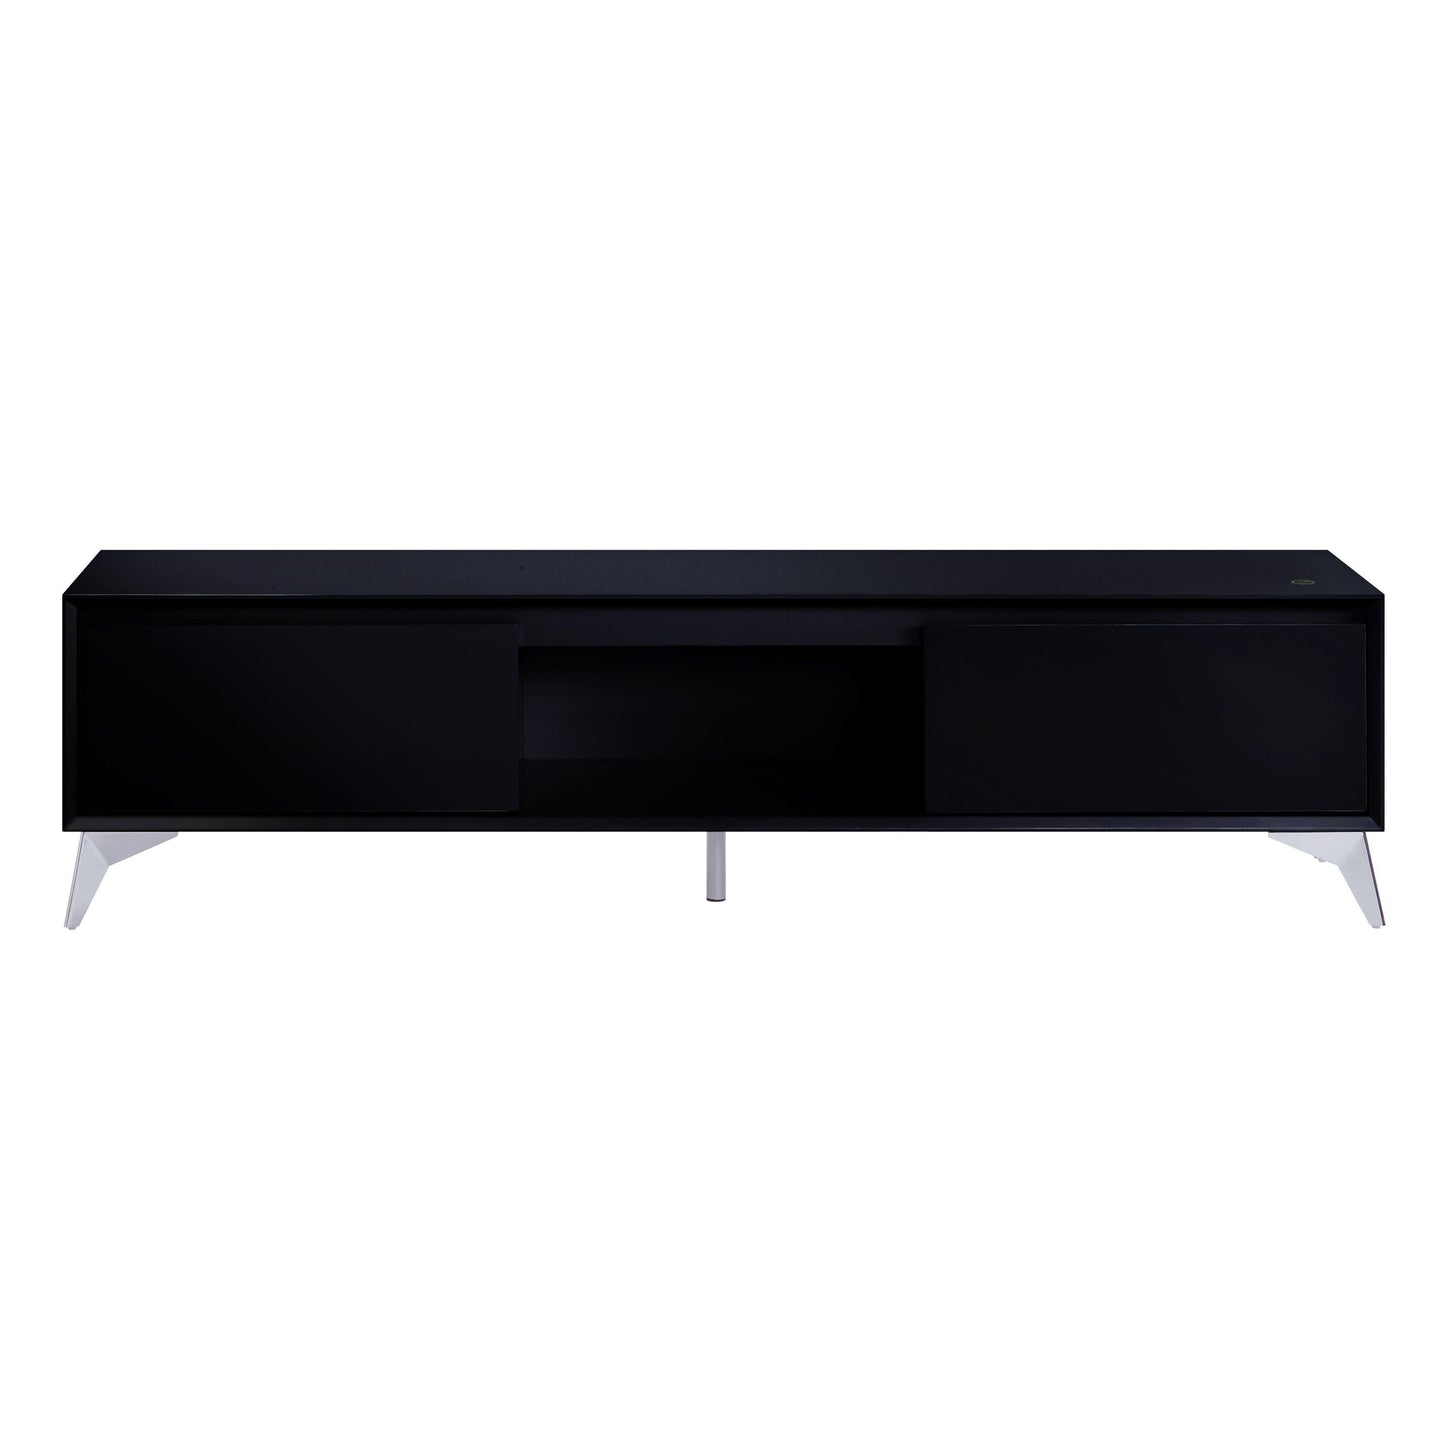 Raceloma TV stand